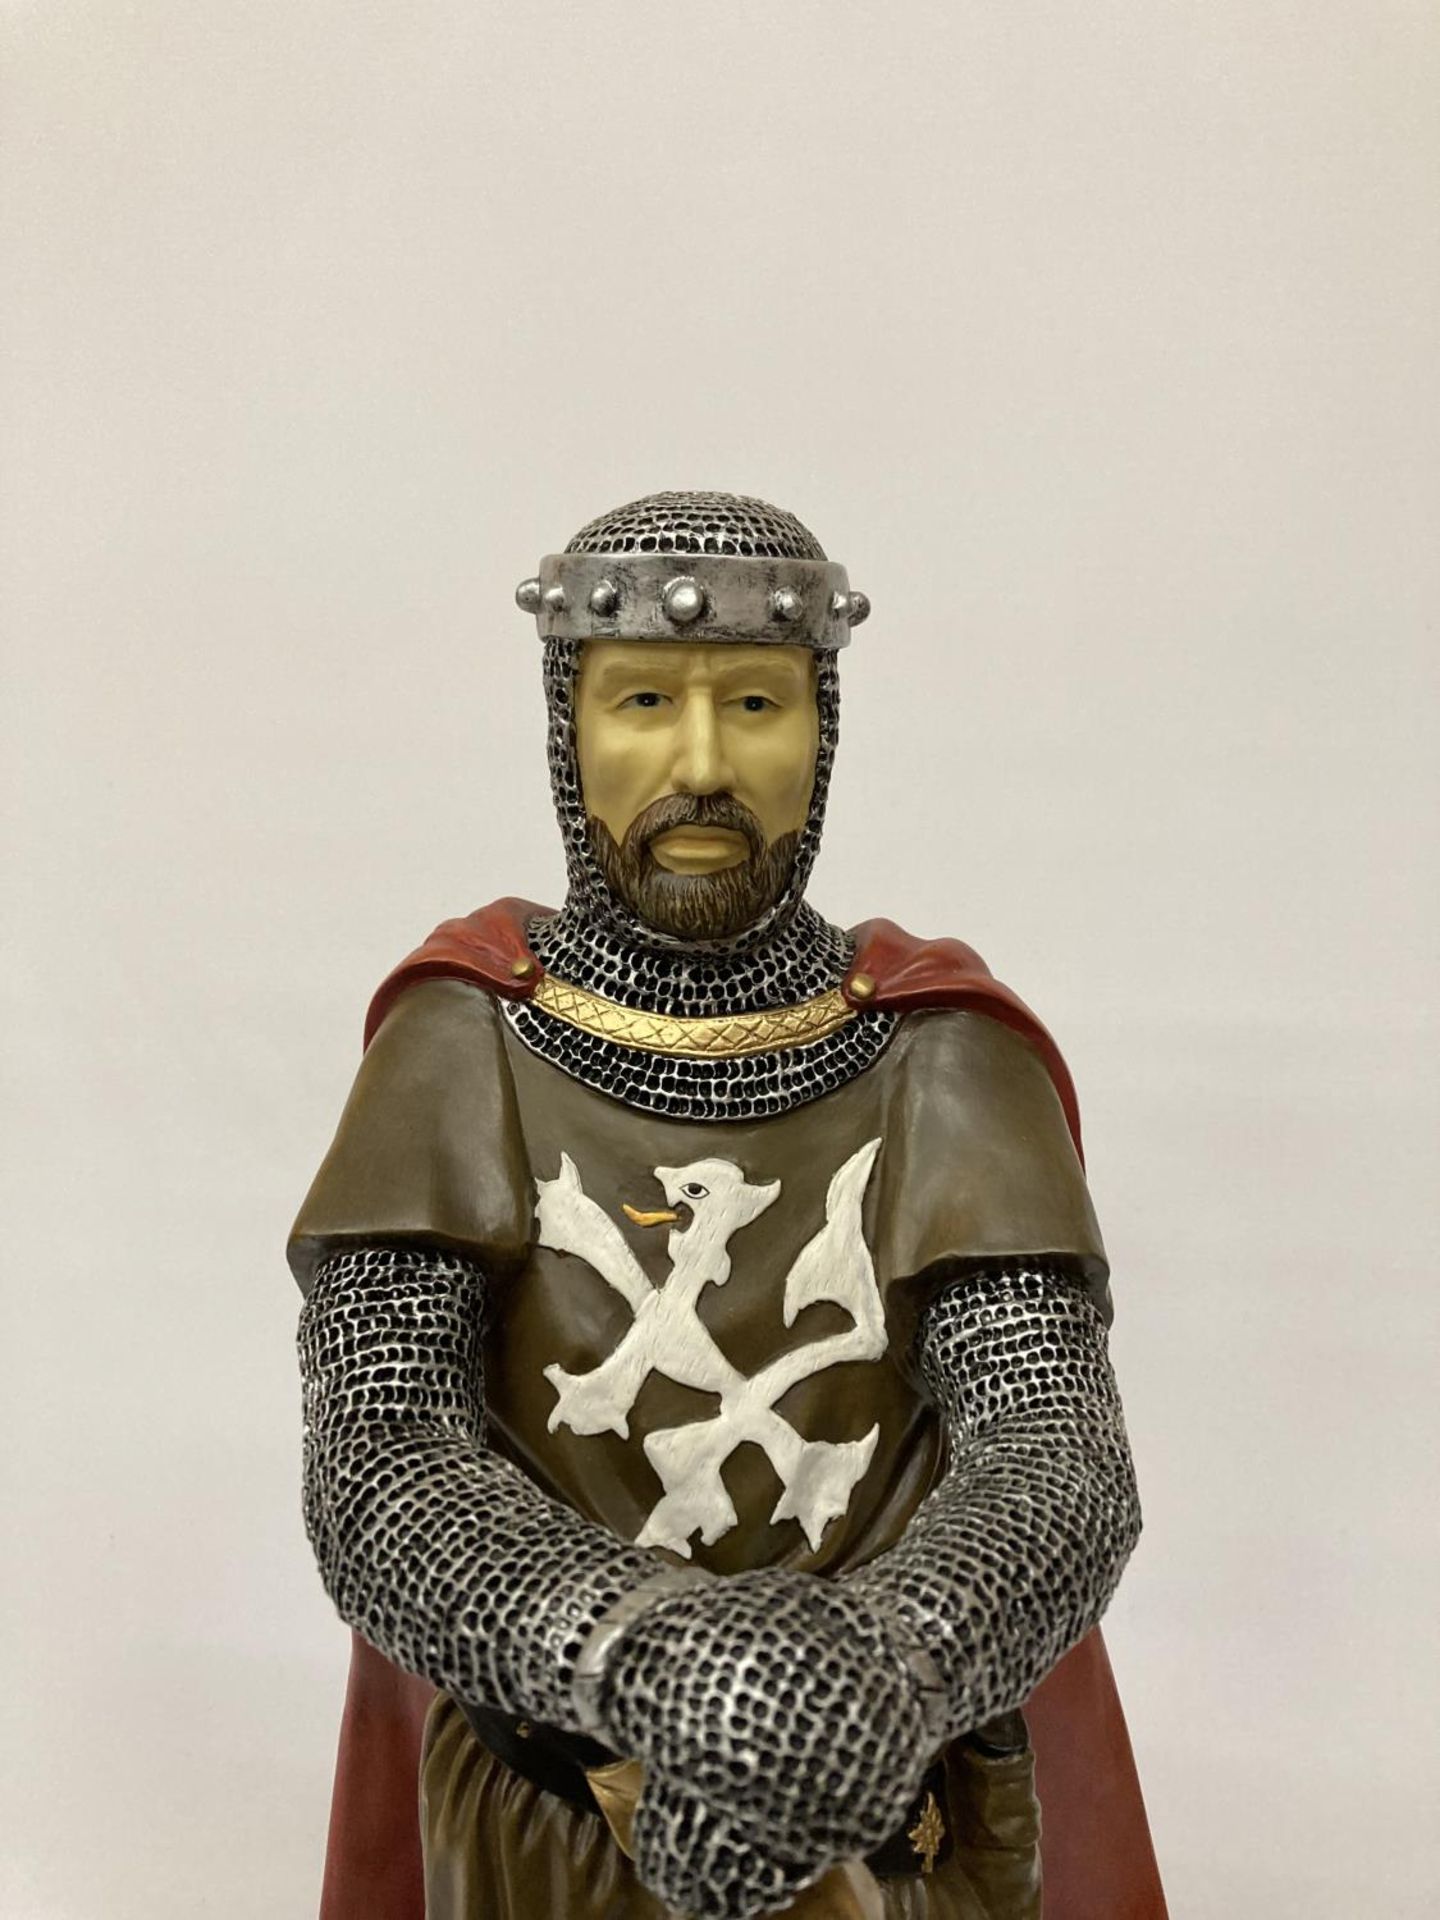 A LARGE KING ARTHUR FIGURE, HEIGHT APPROX 60CM - Image 3 of 6